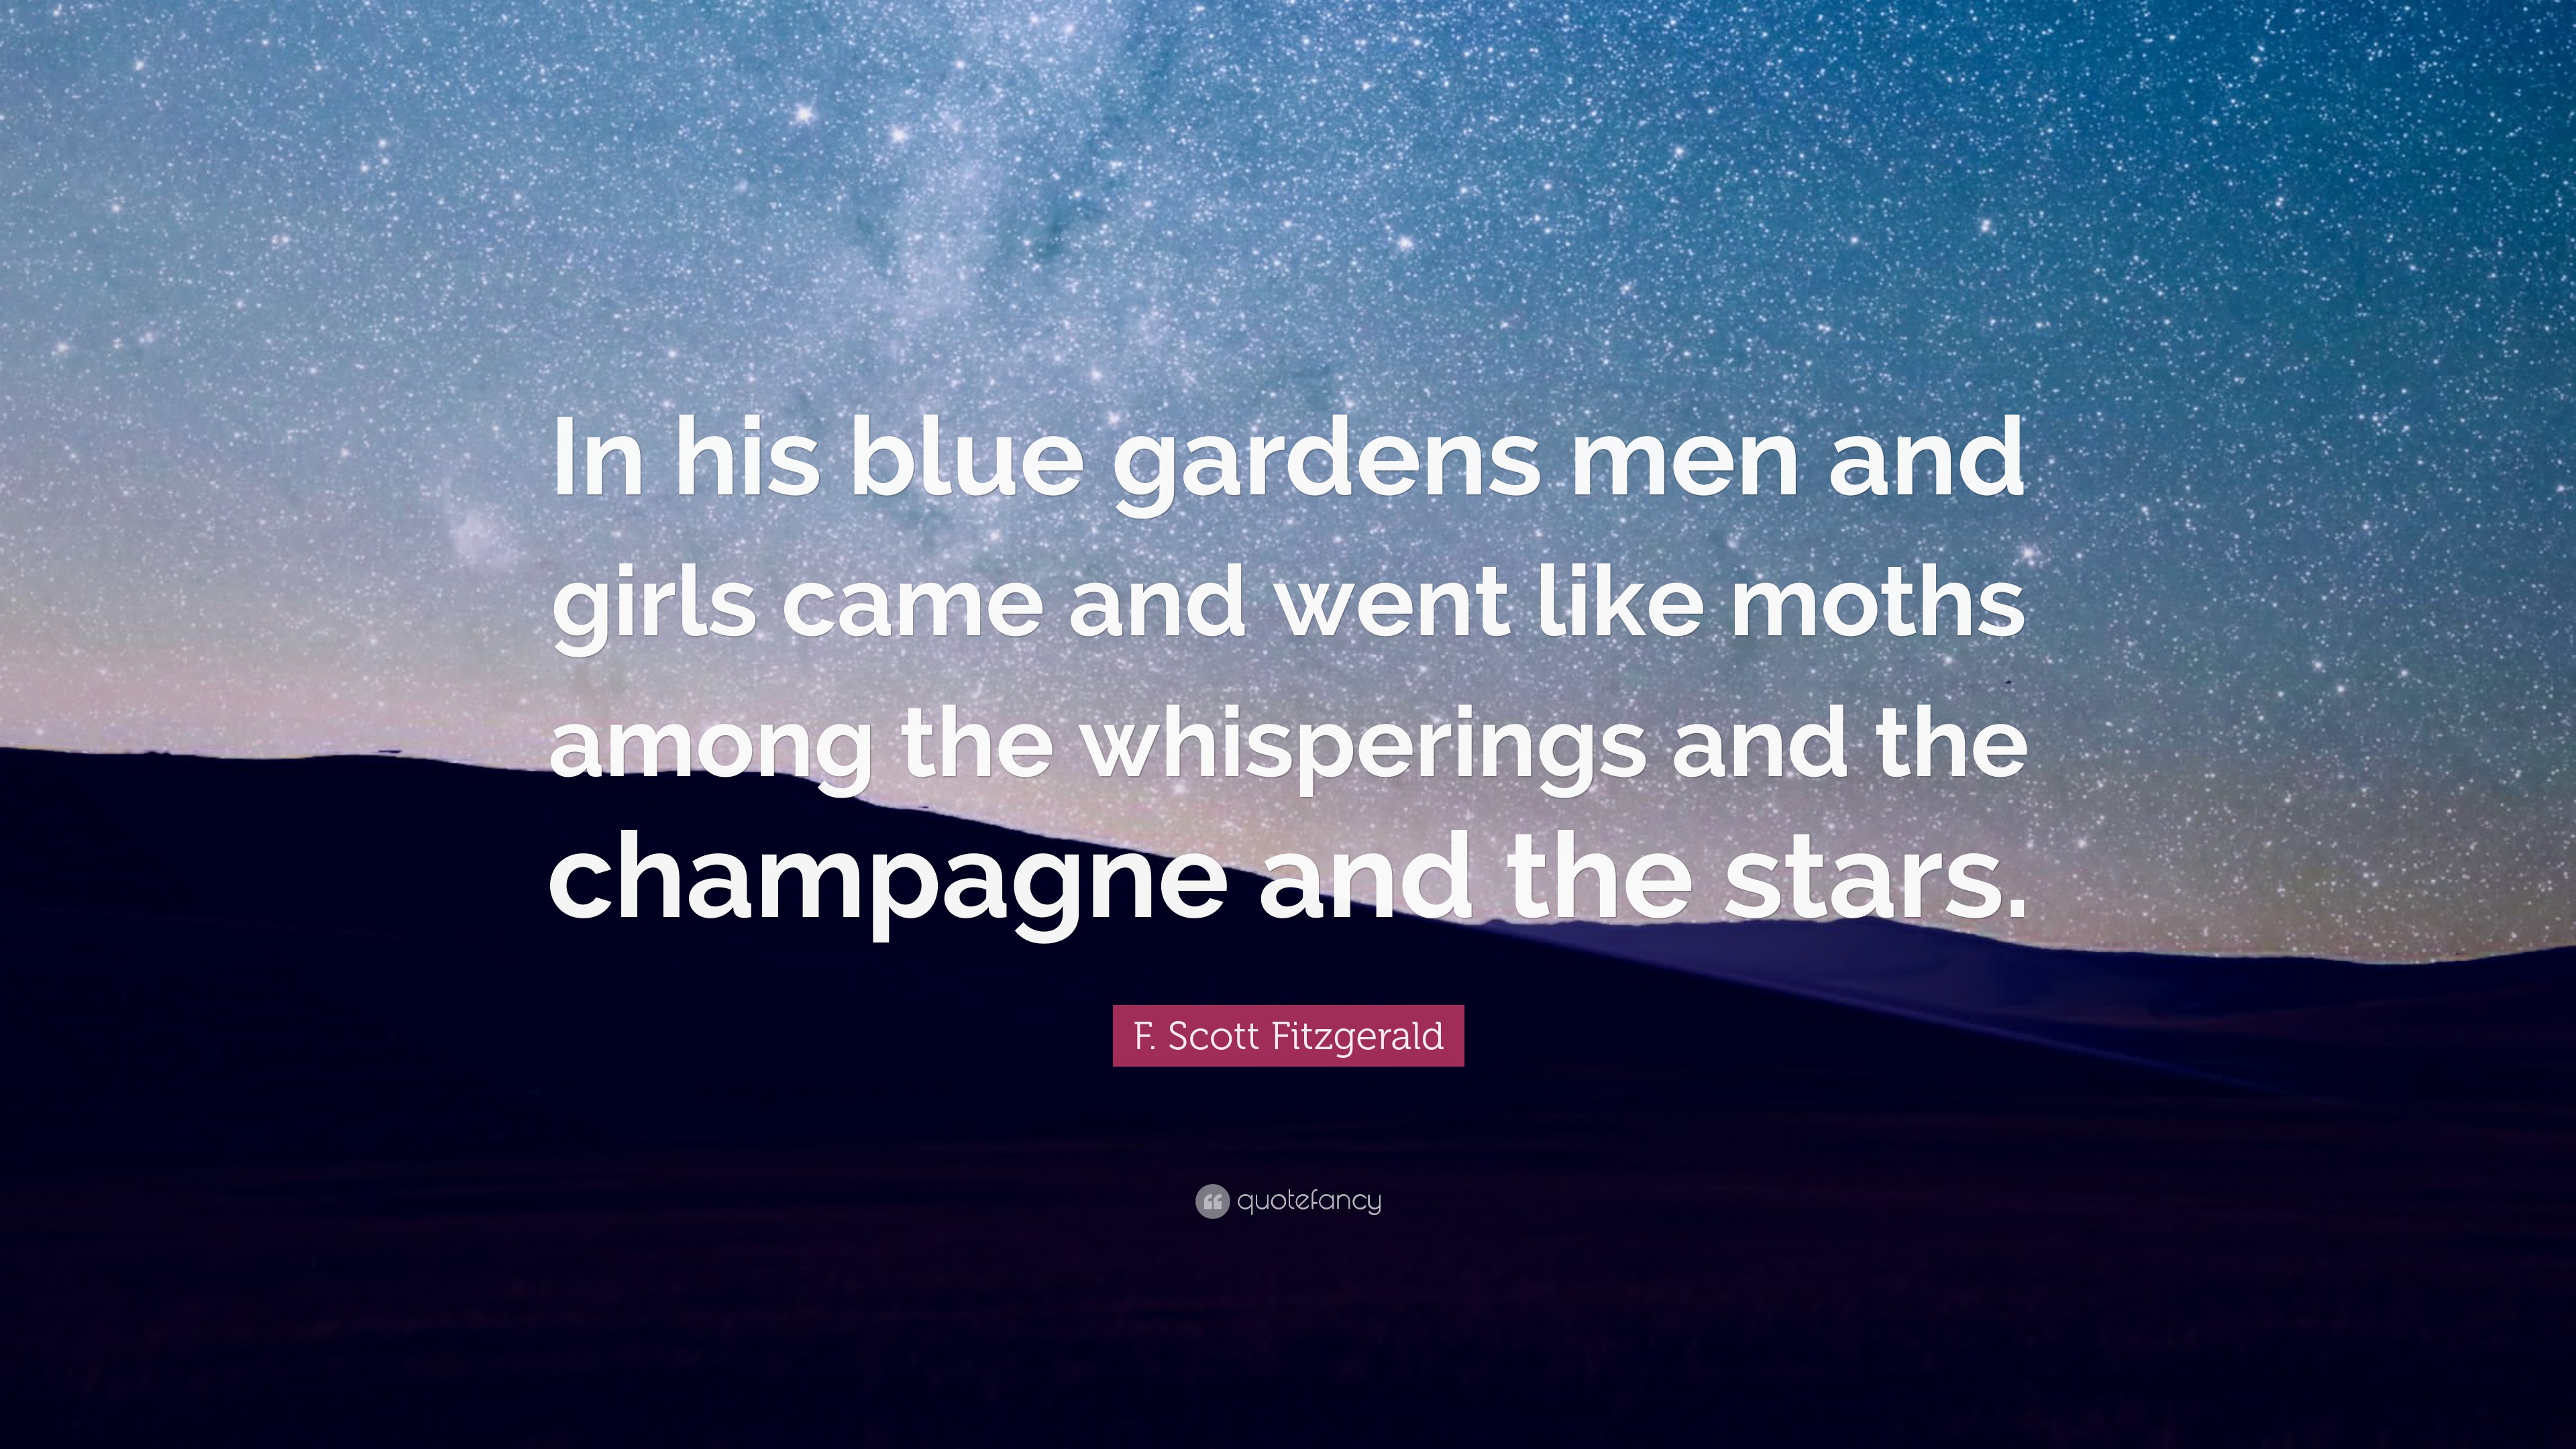 among the whisperings and the champagne and the stars